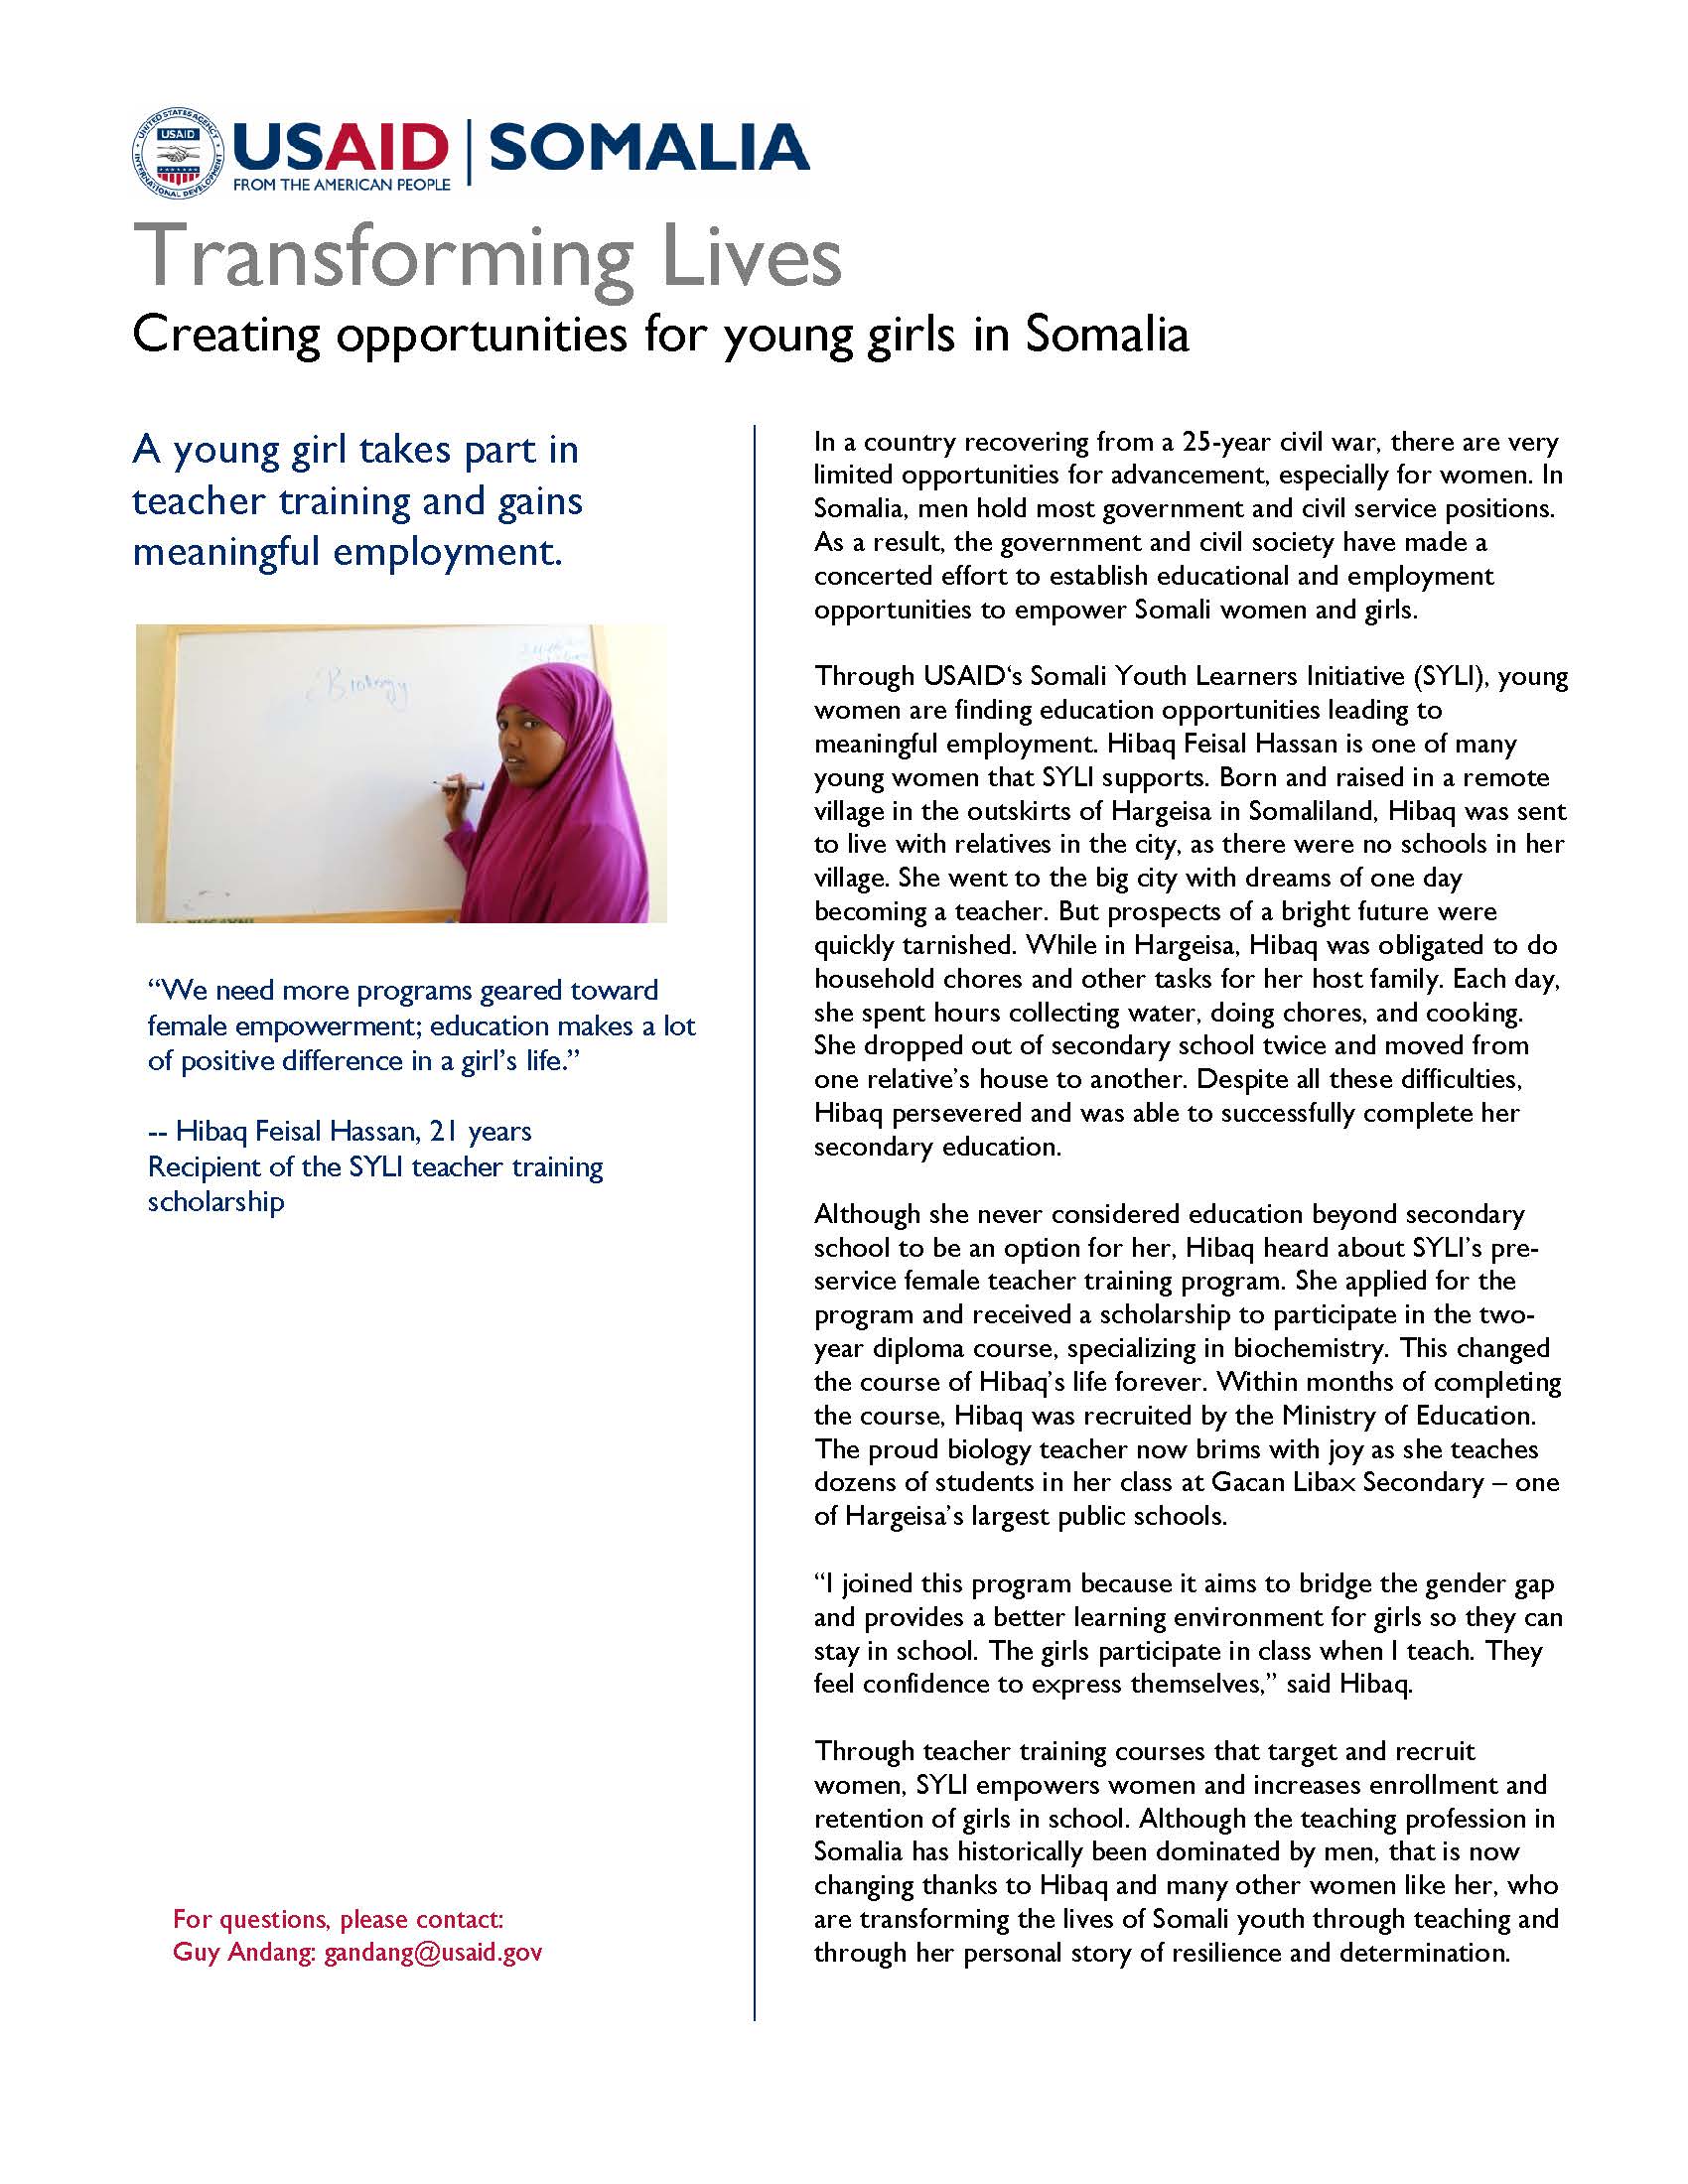 Creating opportunities for young girls in Somalia